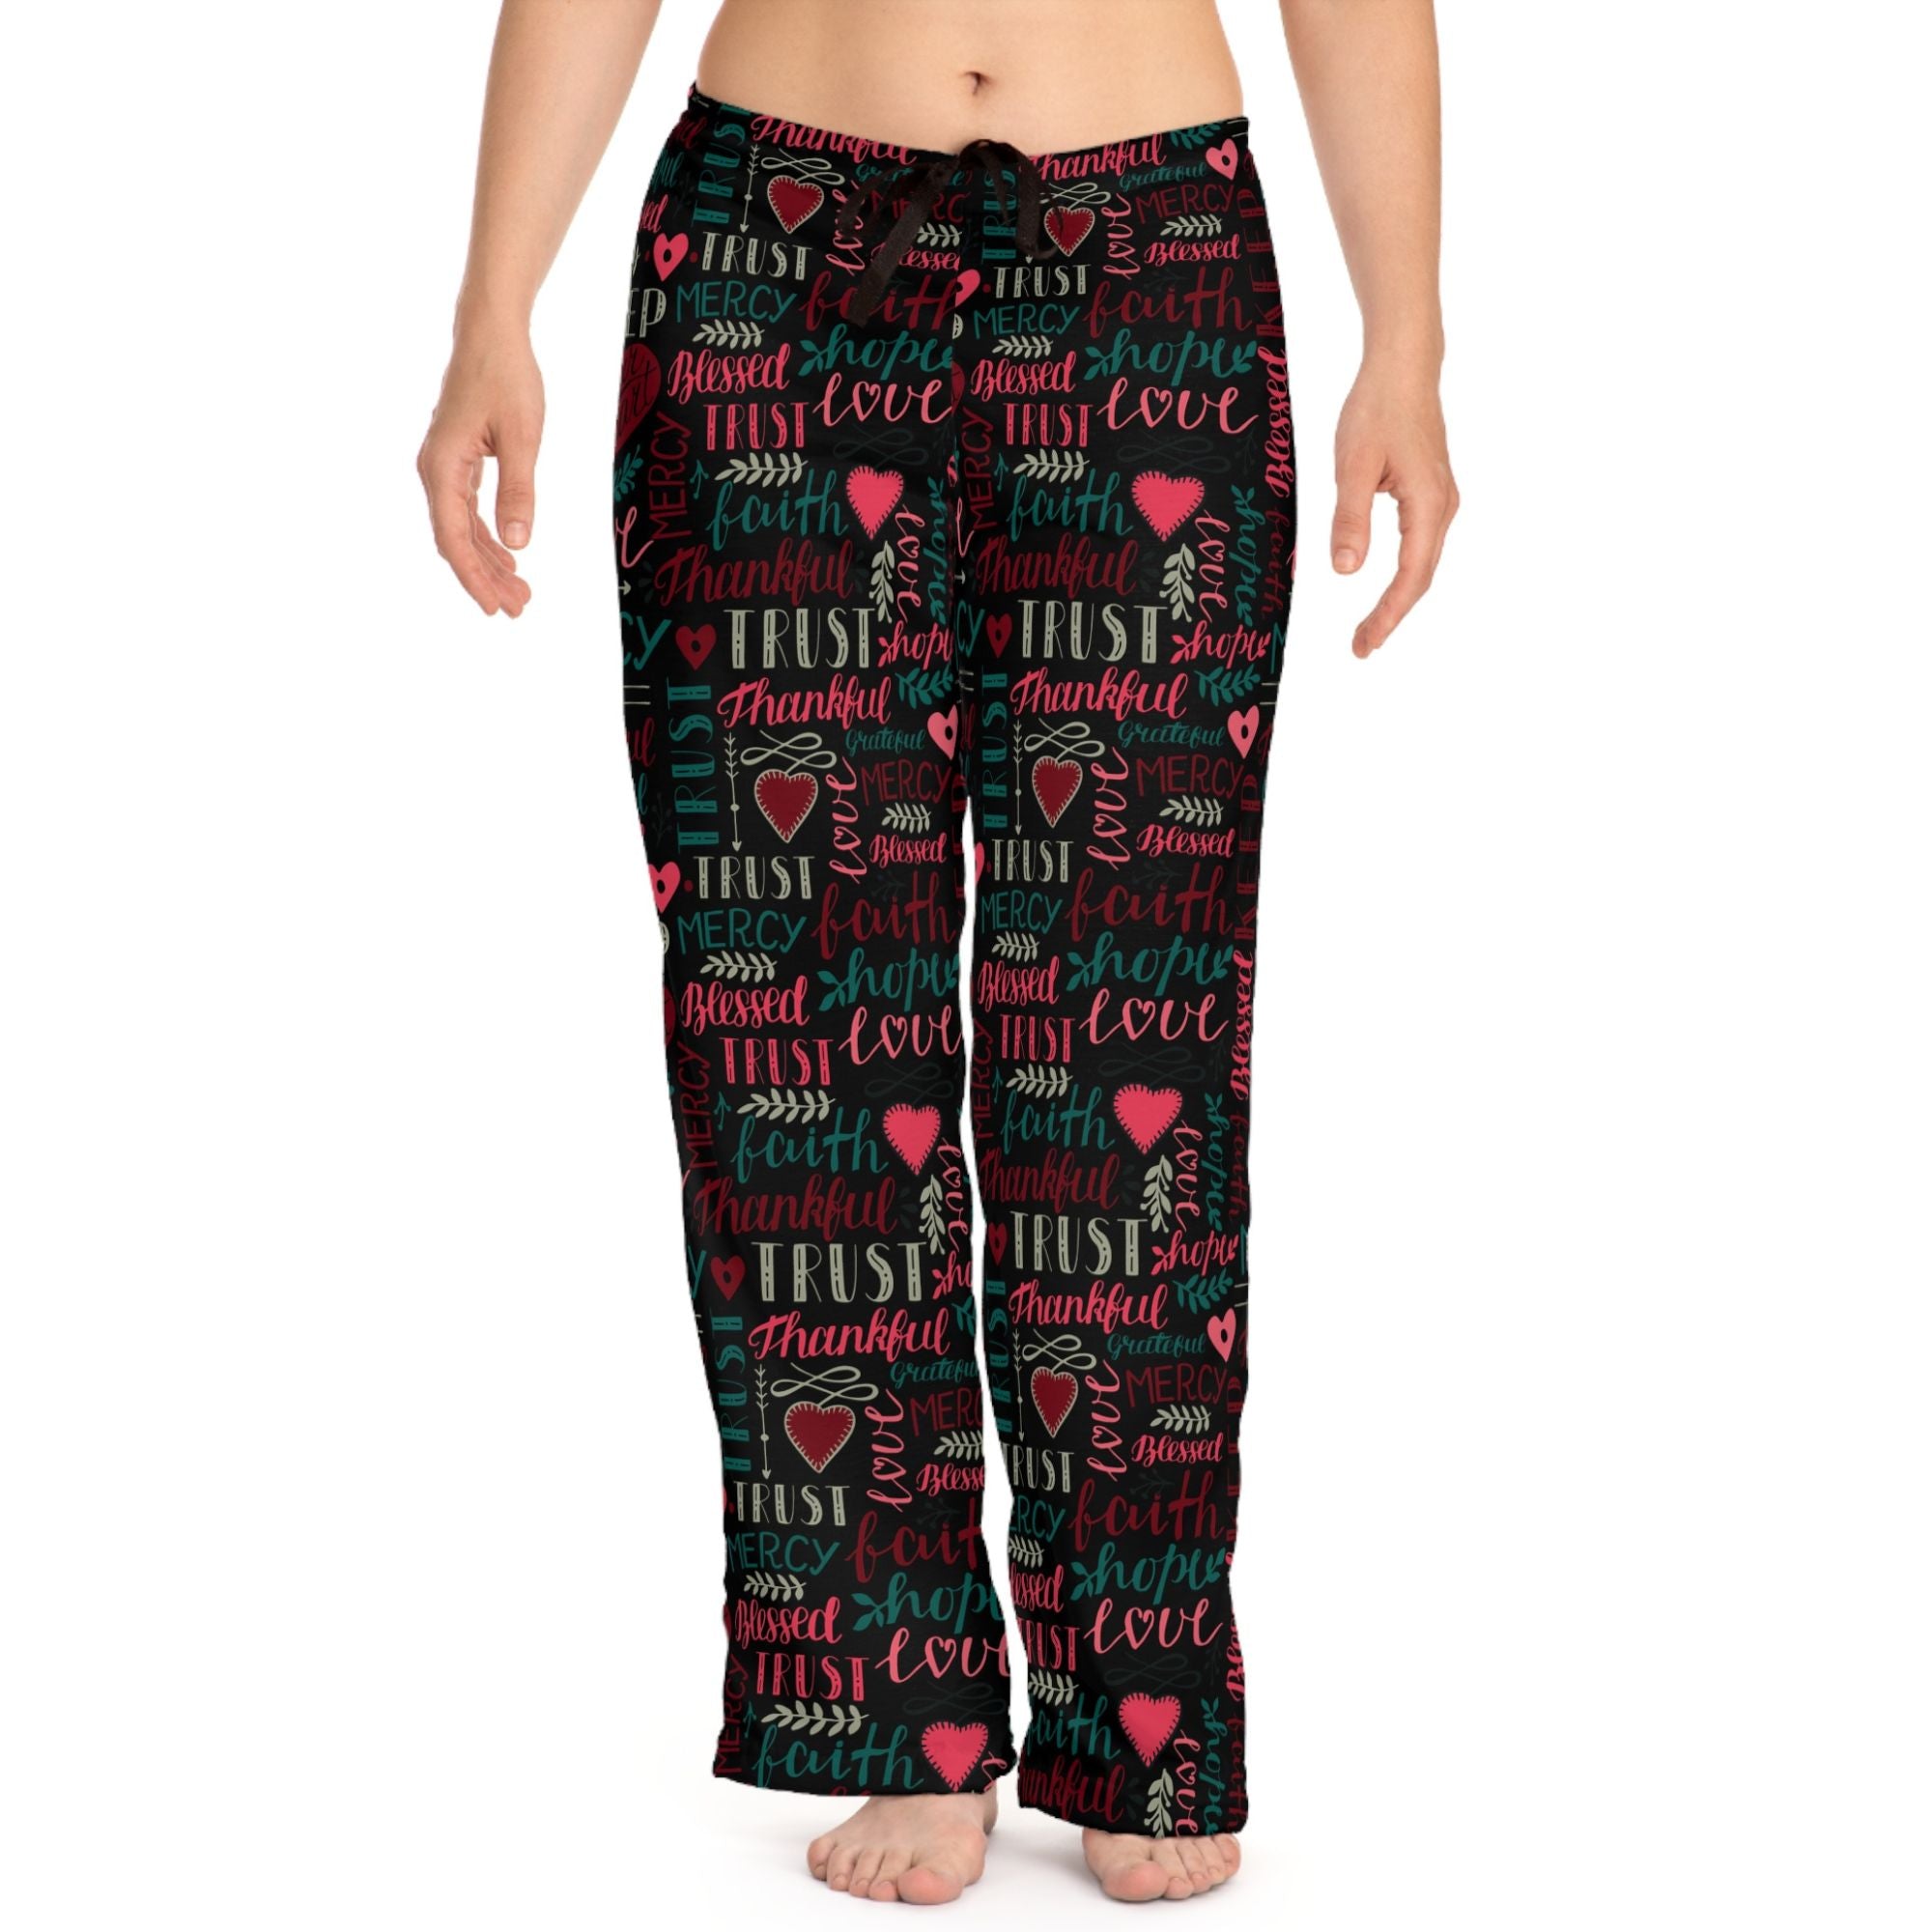 Faith Hope Love Women's Black Lounge / Pajama Pants - Matching Pajama Set and Indoor Slippers Available Size: XS Color: White stitching Jesus Passion Apparel